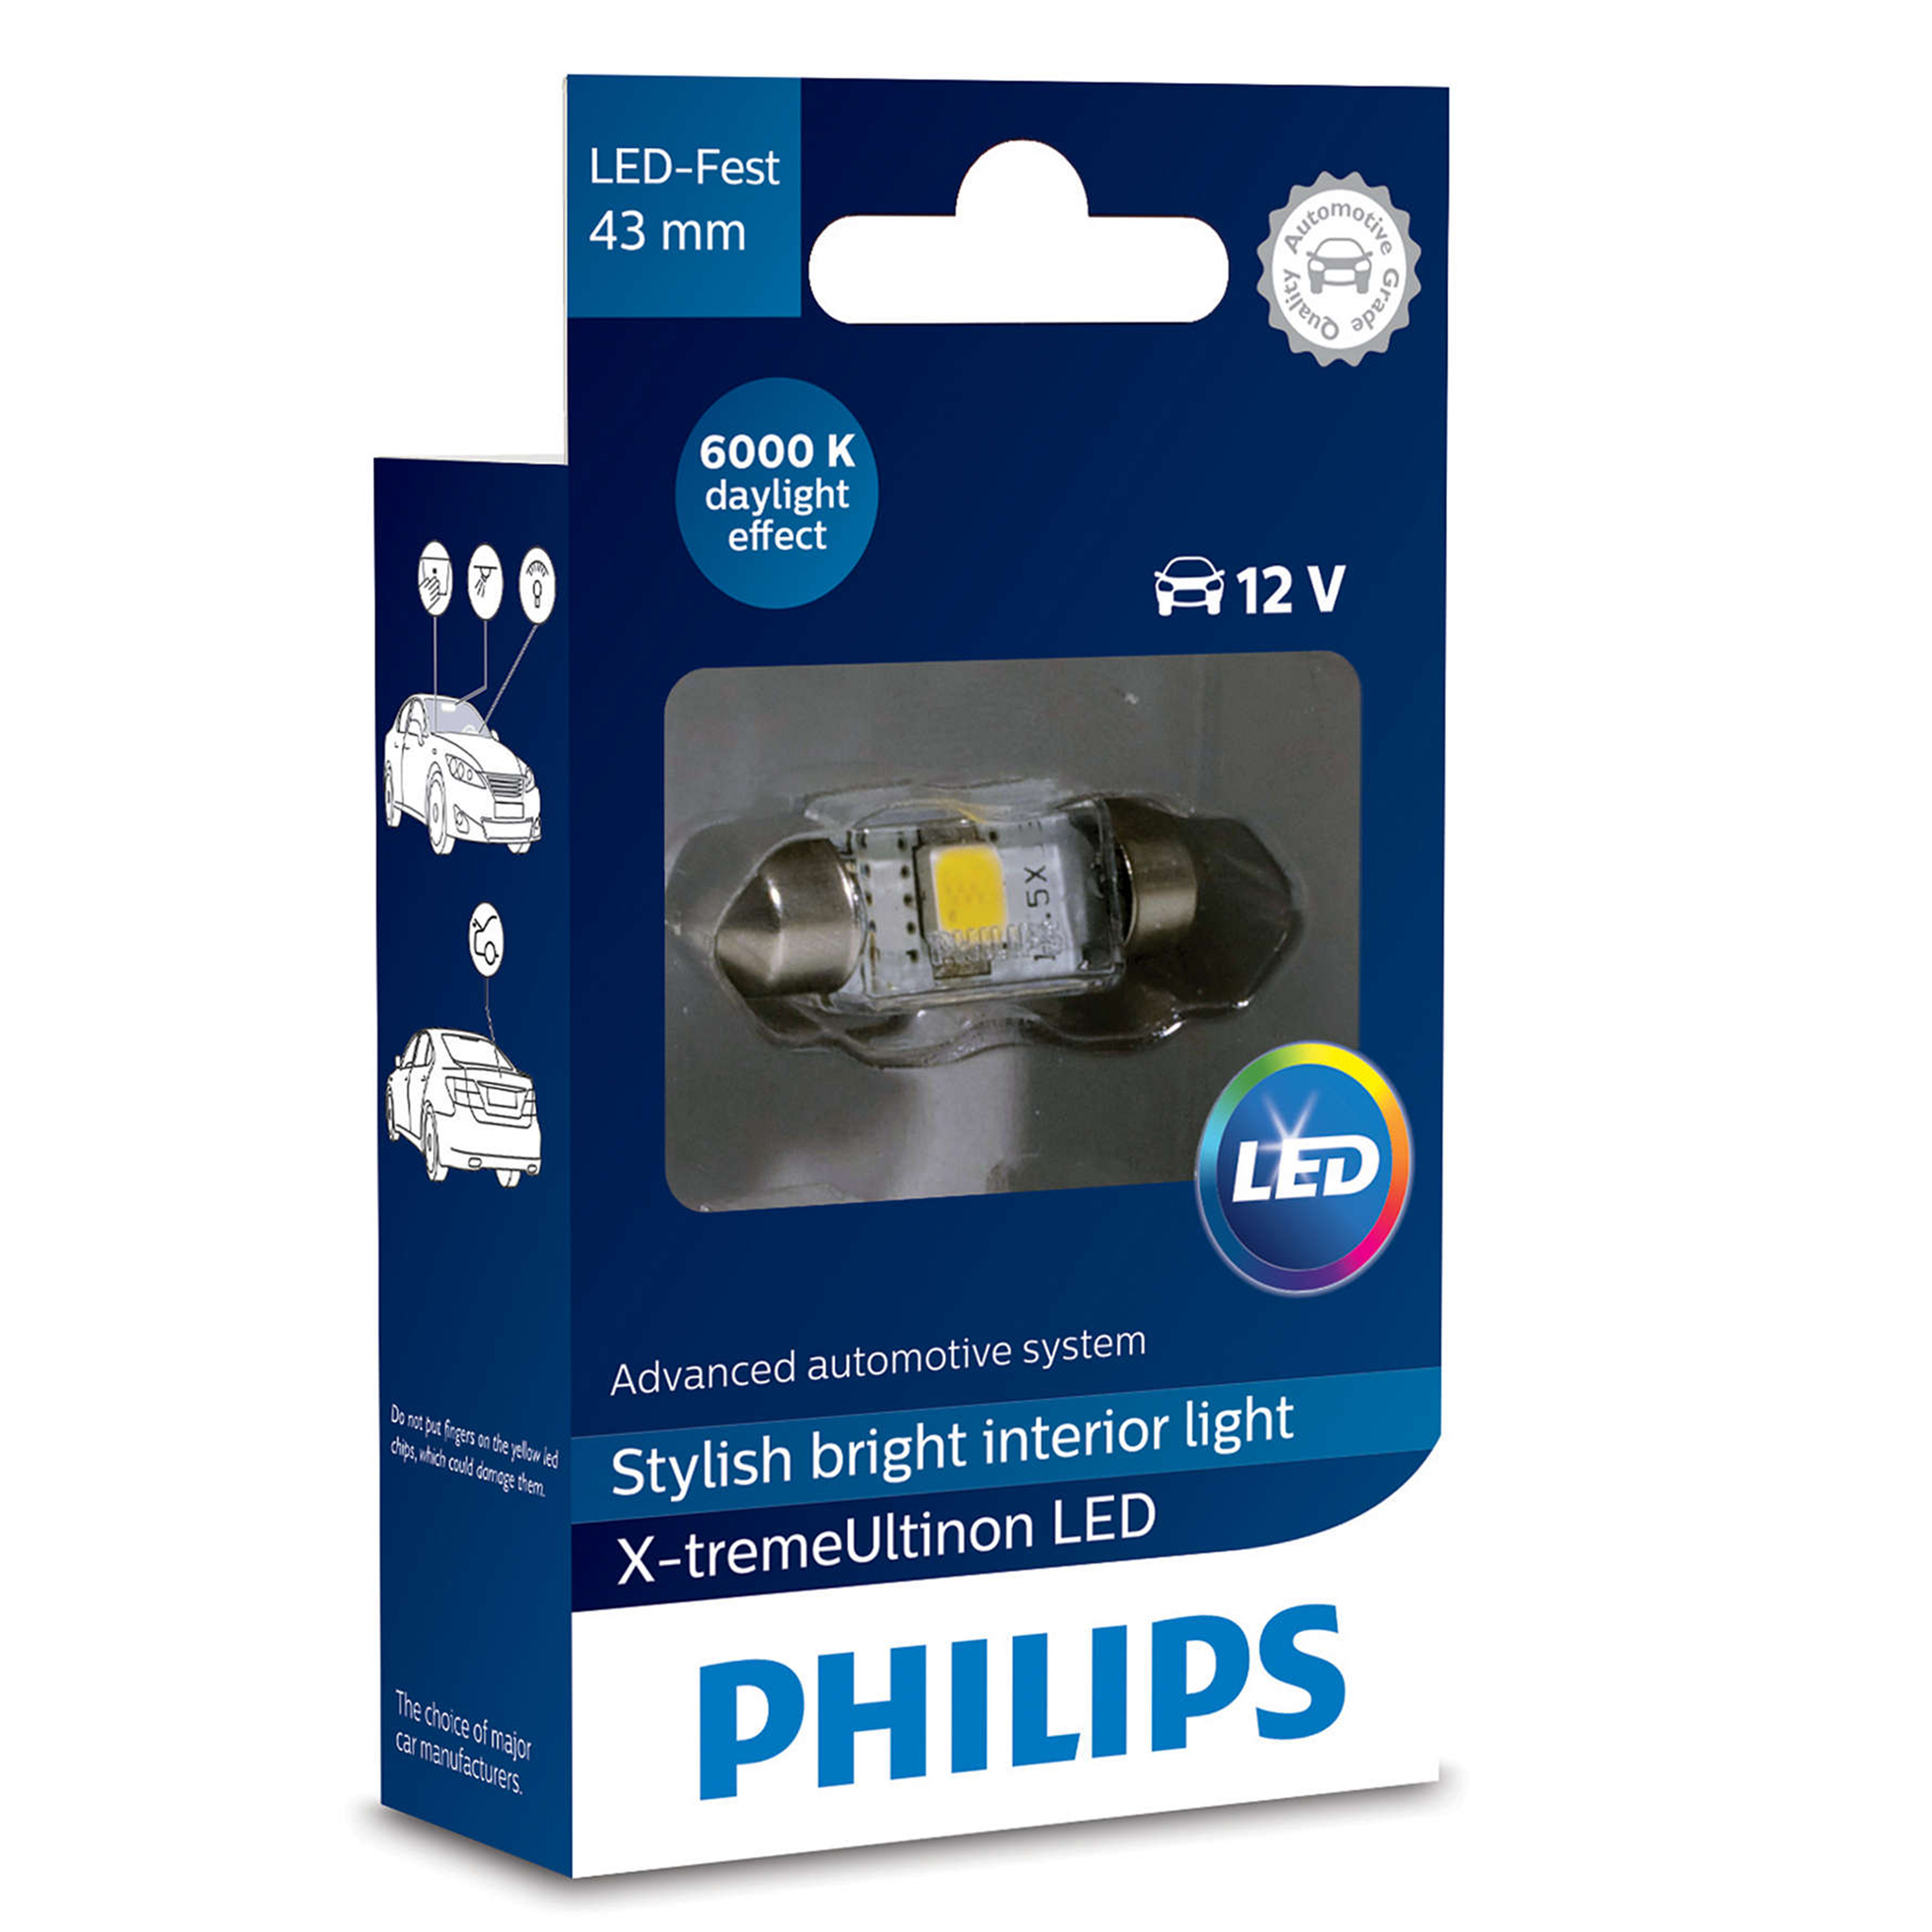 LED-spollampa PHILIPS 43 mm, X-tremeUltinon +200%